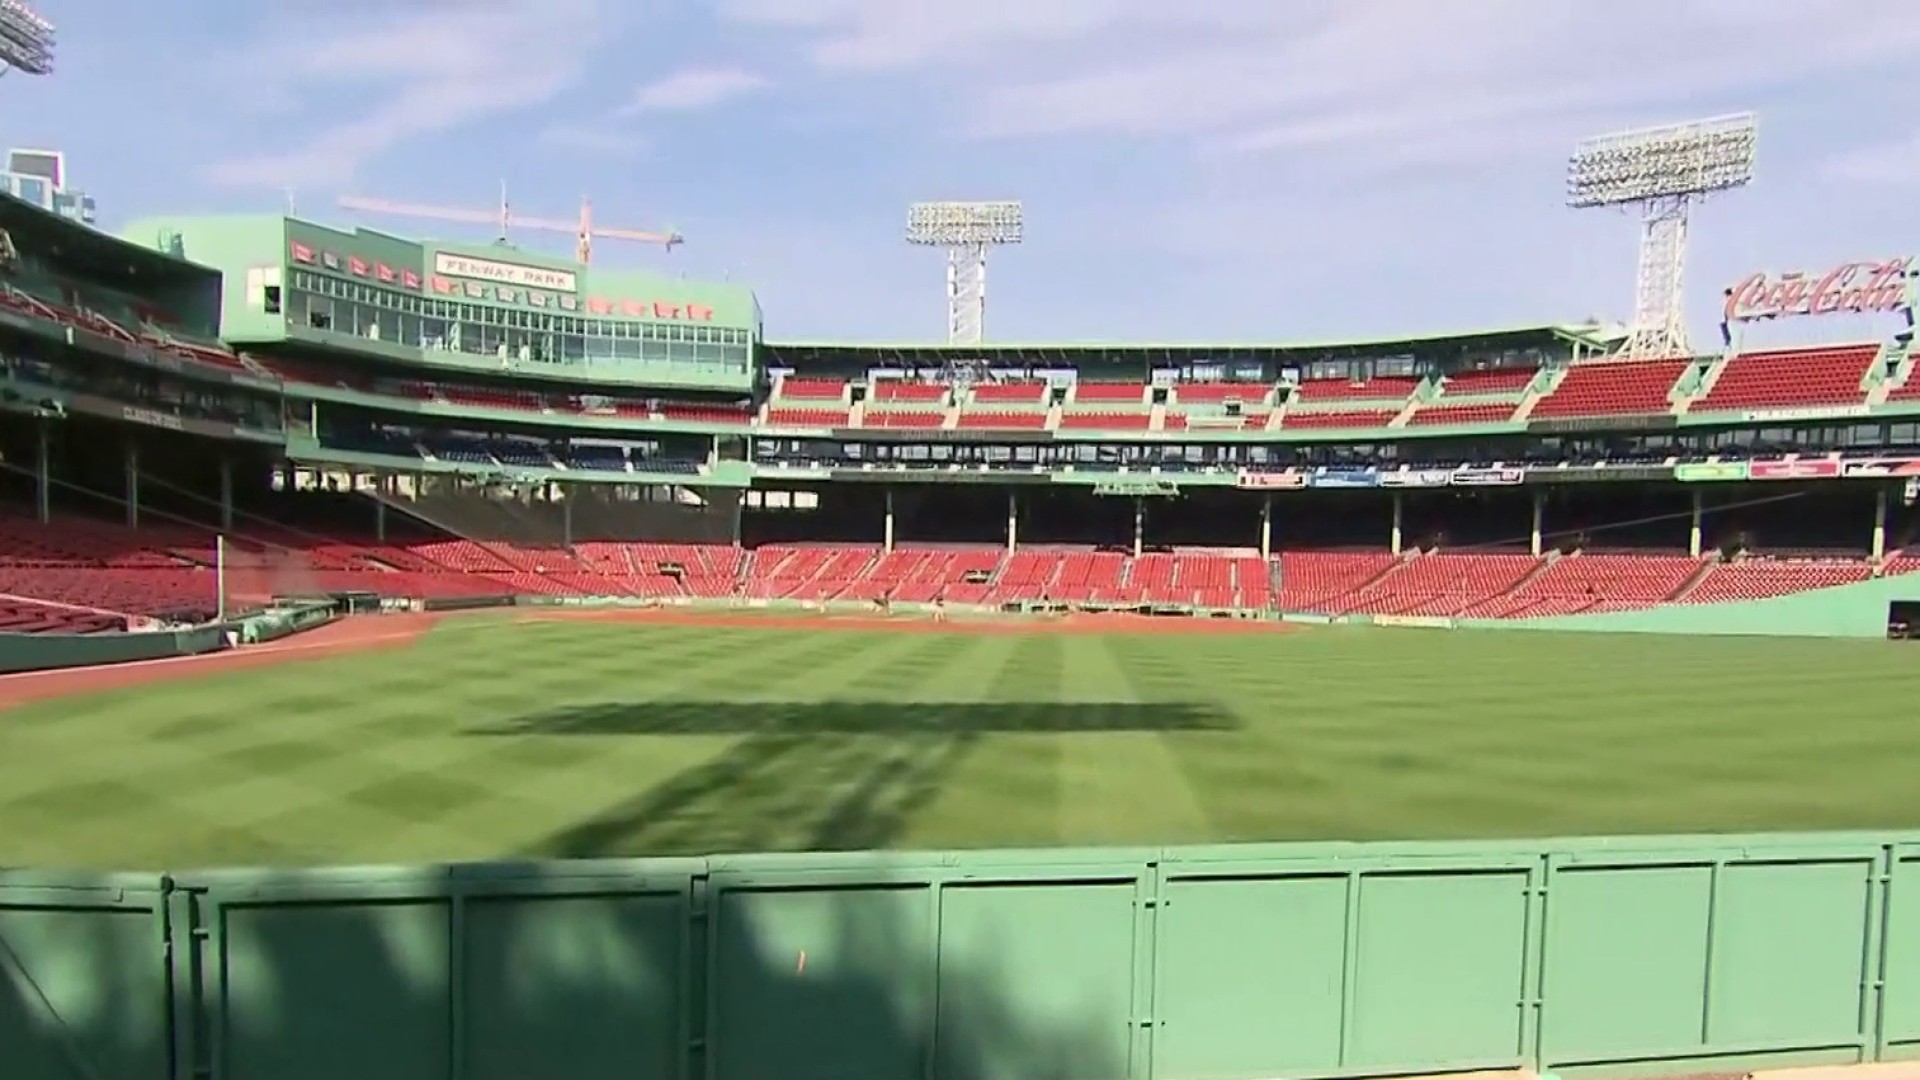 Breakdown Of The Fenway Park Seating Chart